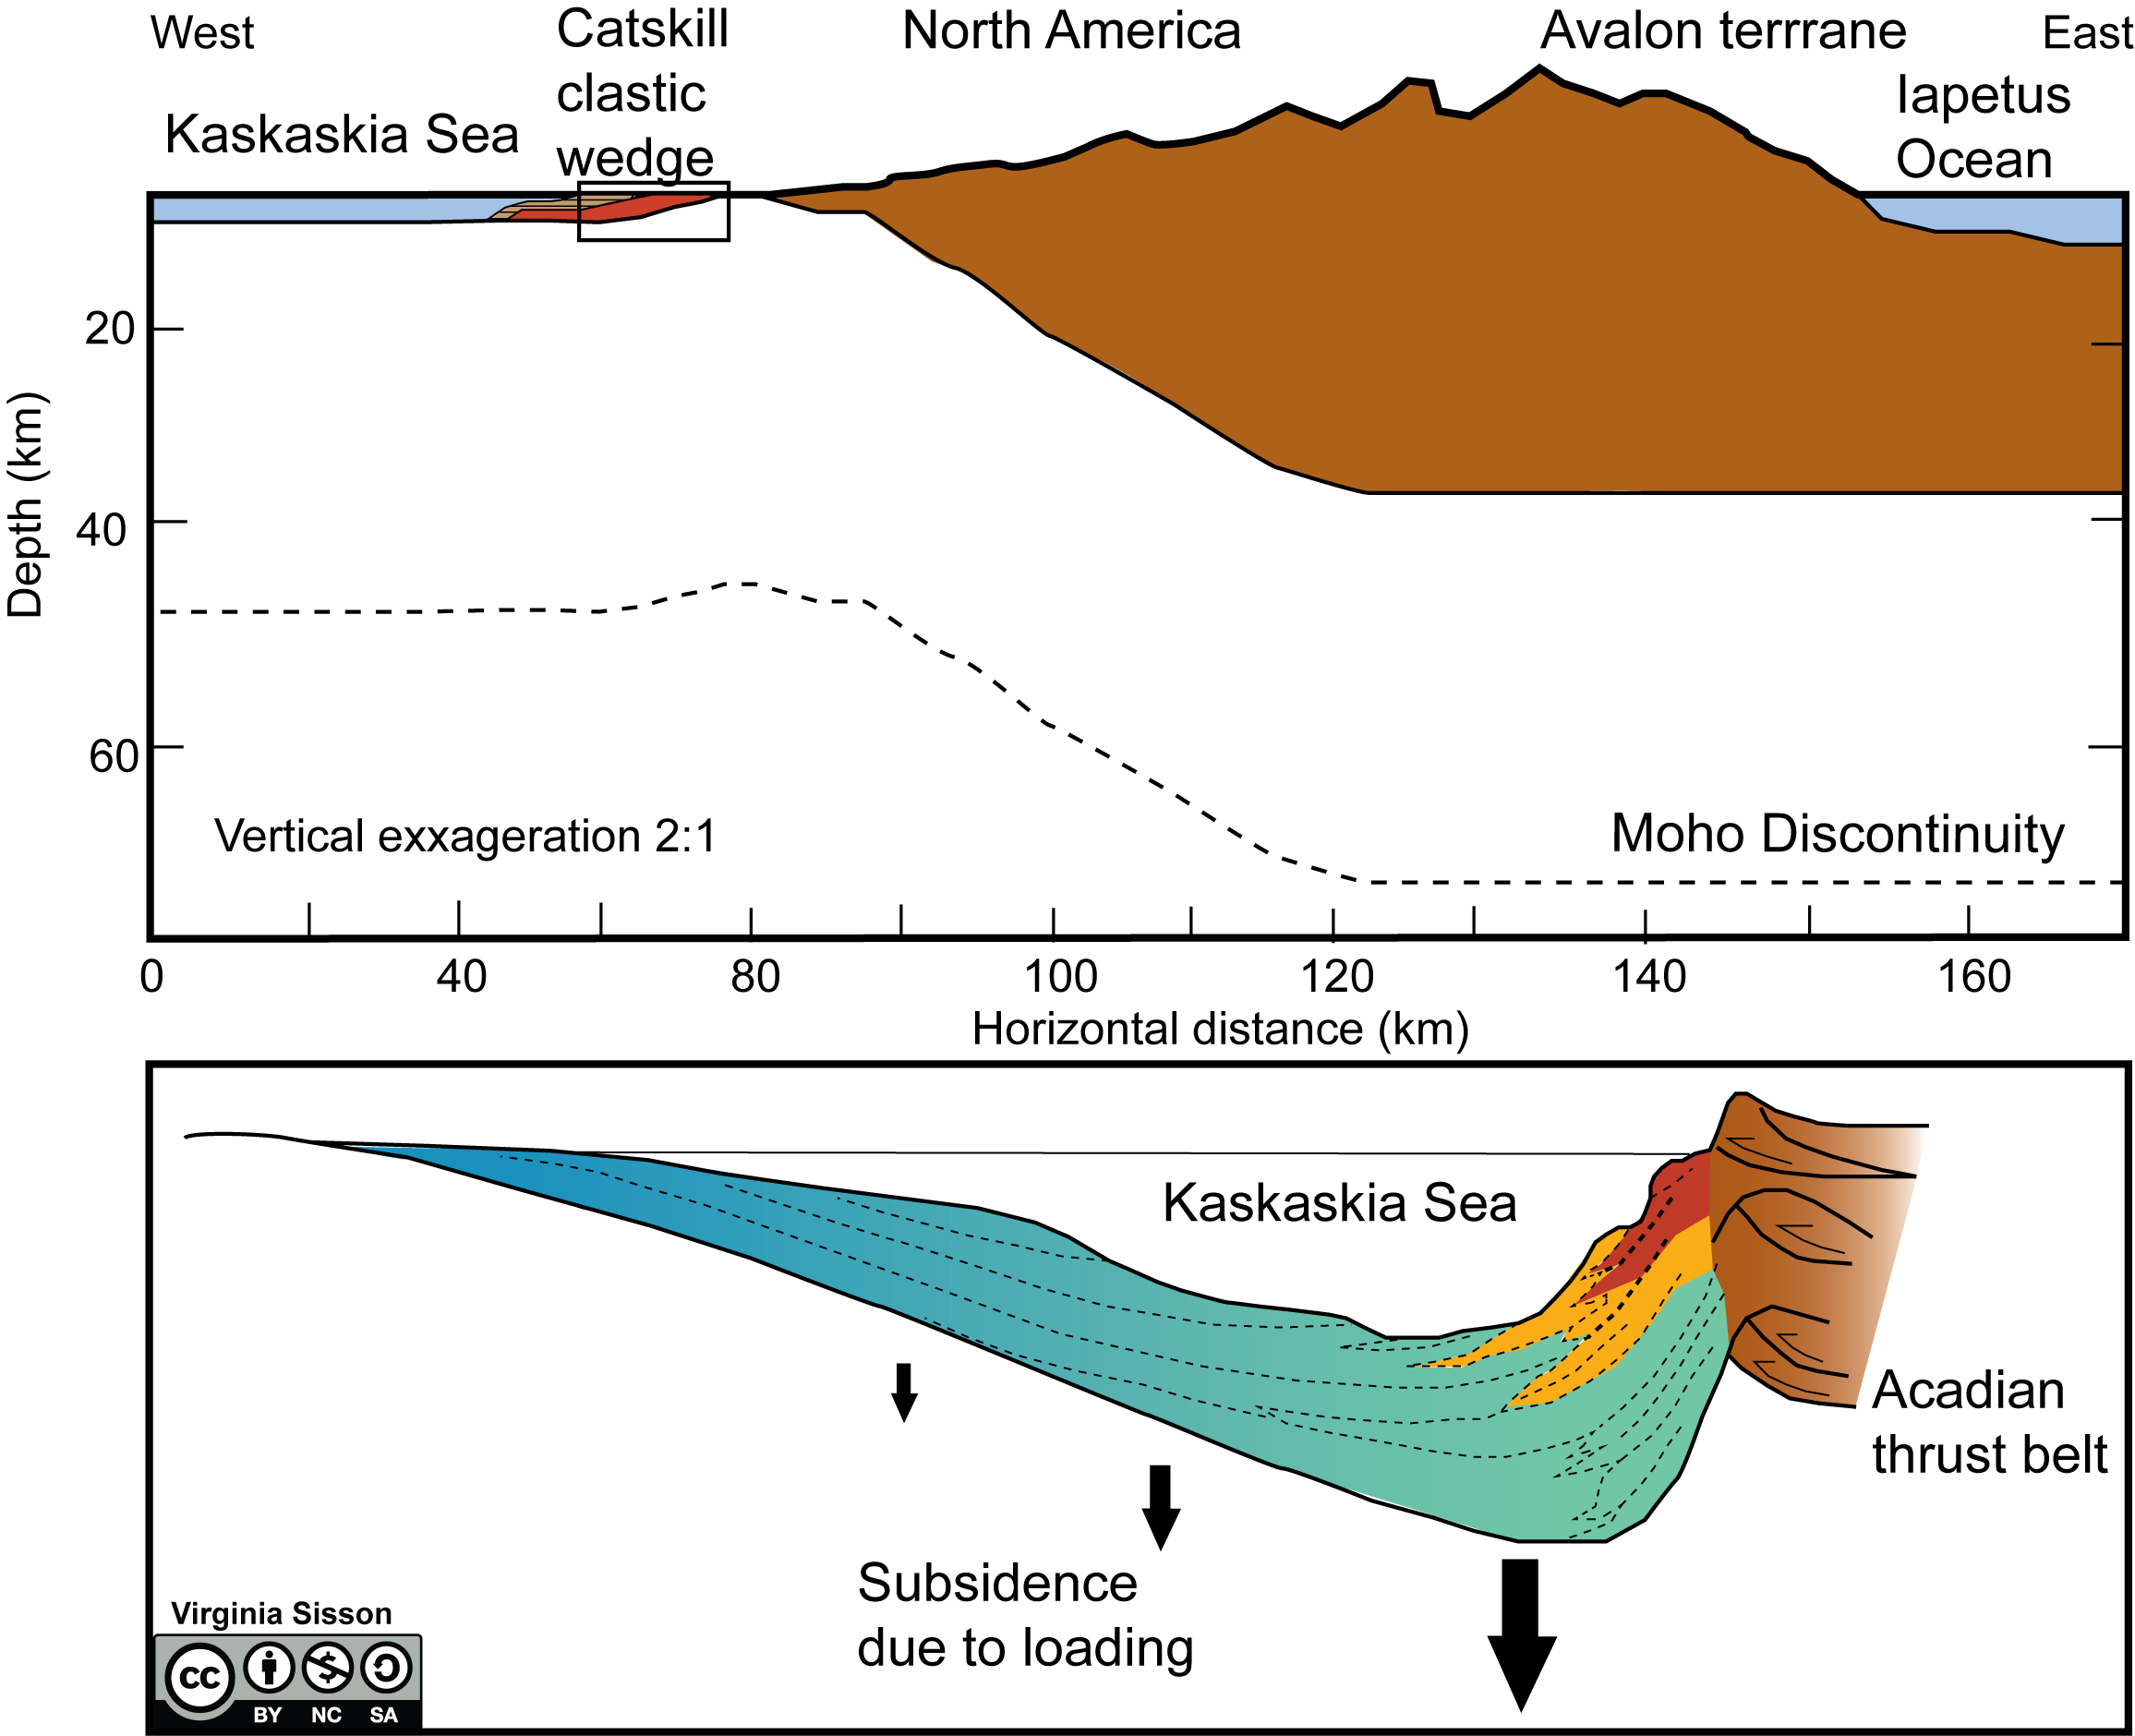 Continental collision can result in formation of the inland Kaskaskia sea and deposition of sediment in foreland basins